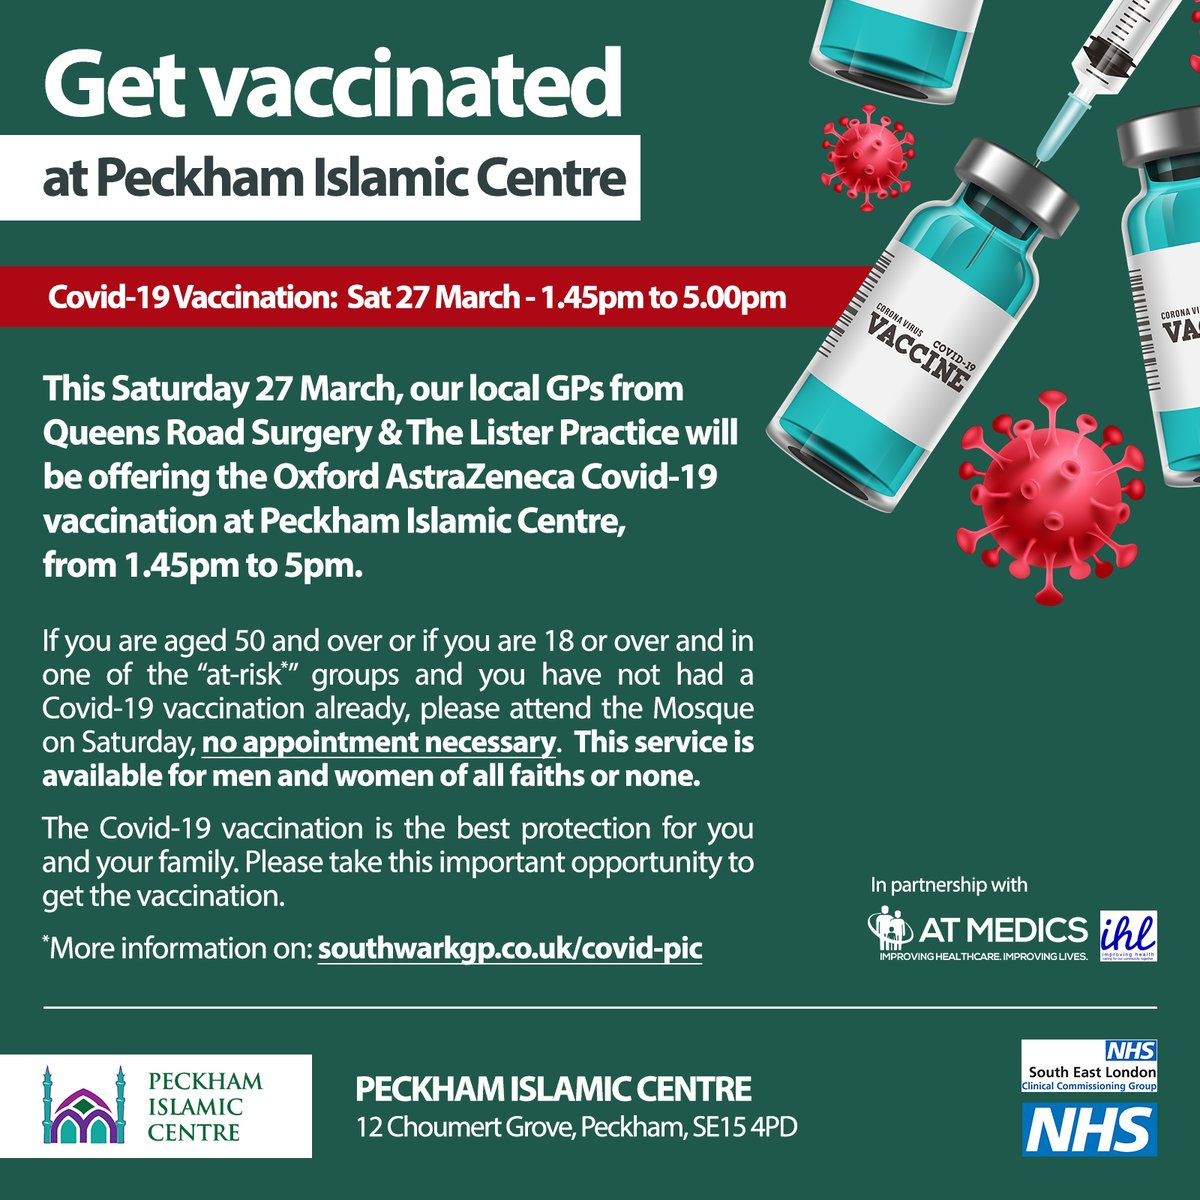 This Sat 27 March, our team from #QueensRoadSurgery and #ListerPractice in #Peckham will be giving the #COVID19Vaccine at #PeckhamIslamicCentre for eligible people *NO APPOINTMENT NEEDED* Find out more: bit.ly/2Pgelf3 @IHLSouthwark @NikkiKF @TheDrJonty @PrimaryCareNHS